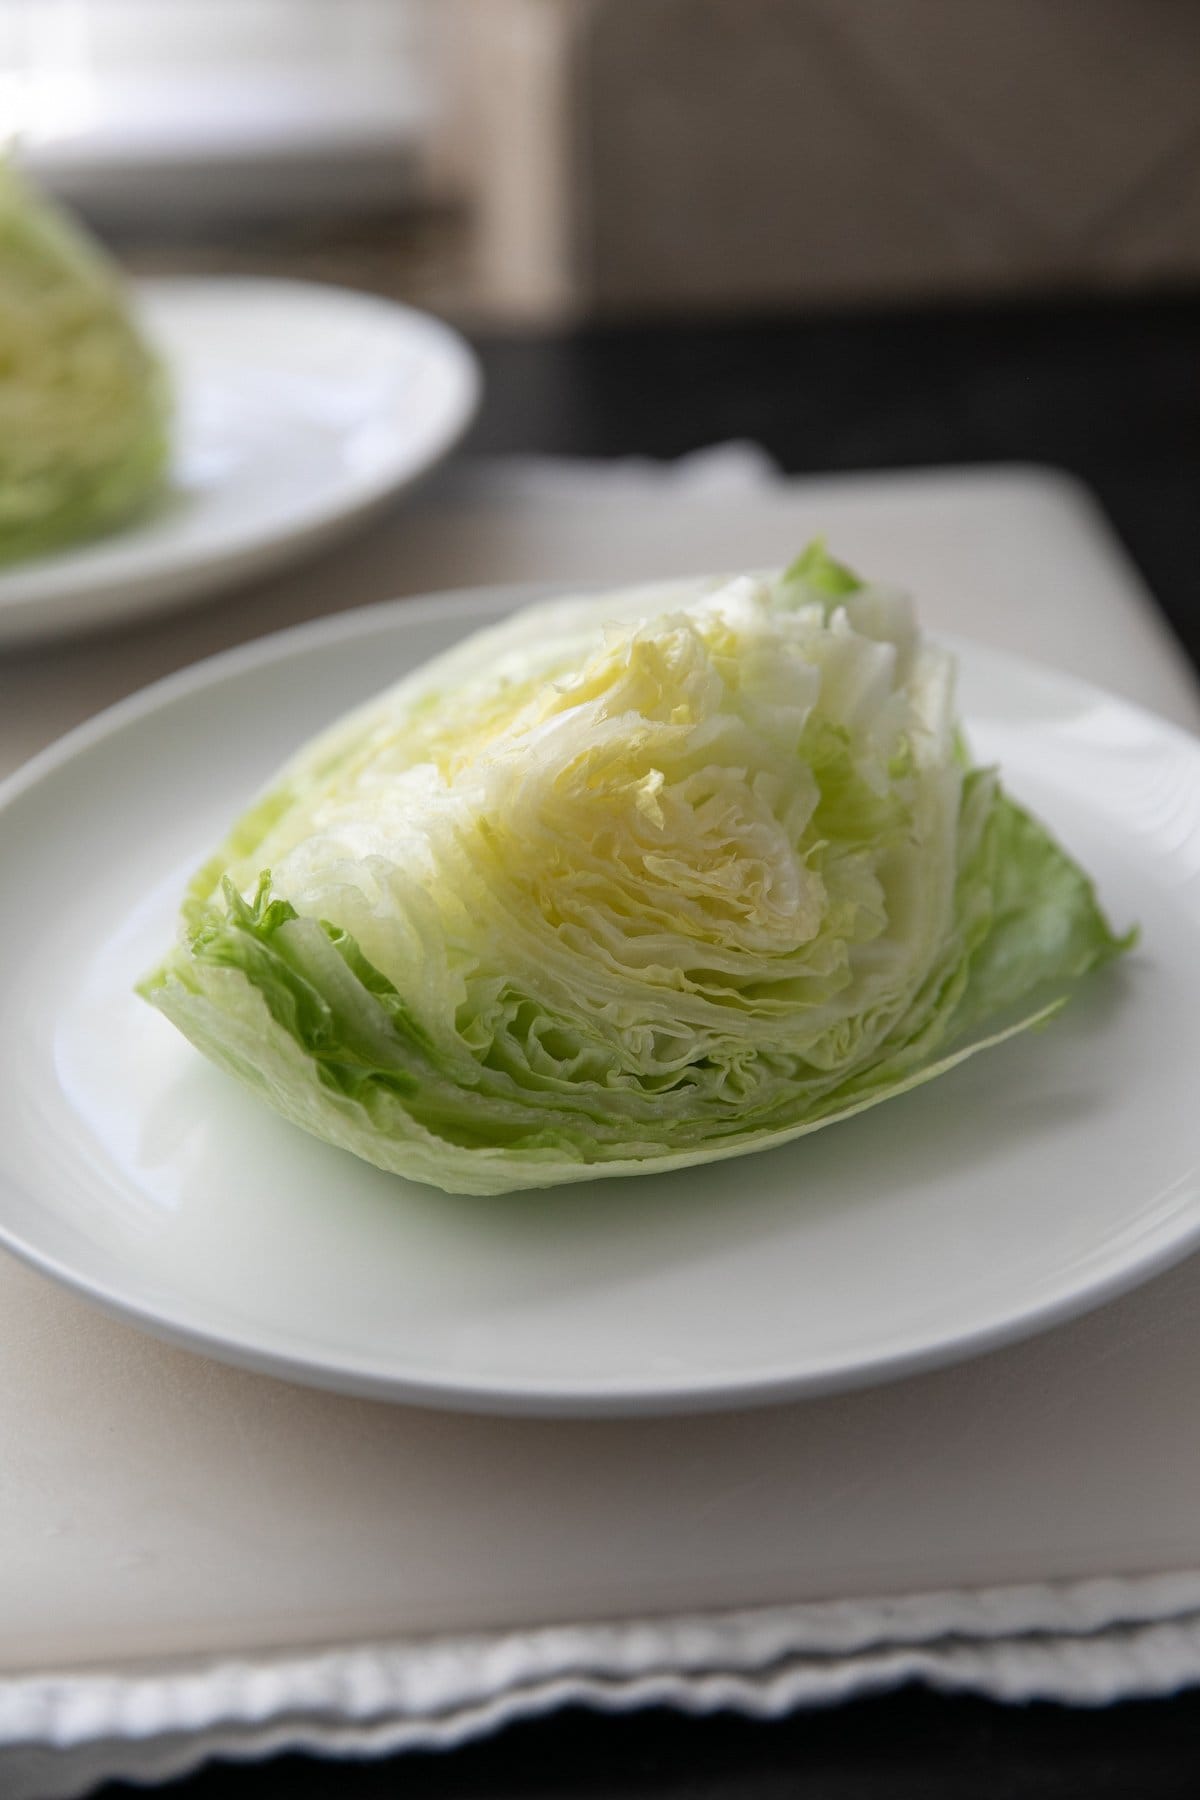 a wedge of iceberg lettuce on a white plate